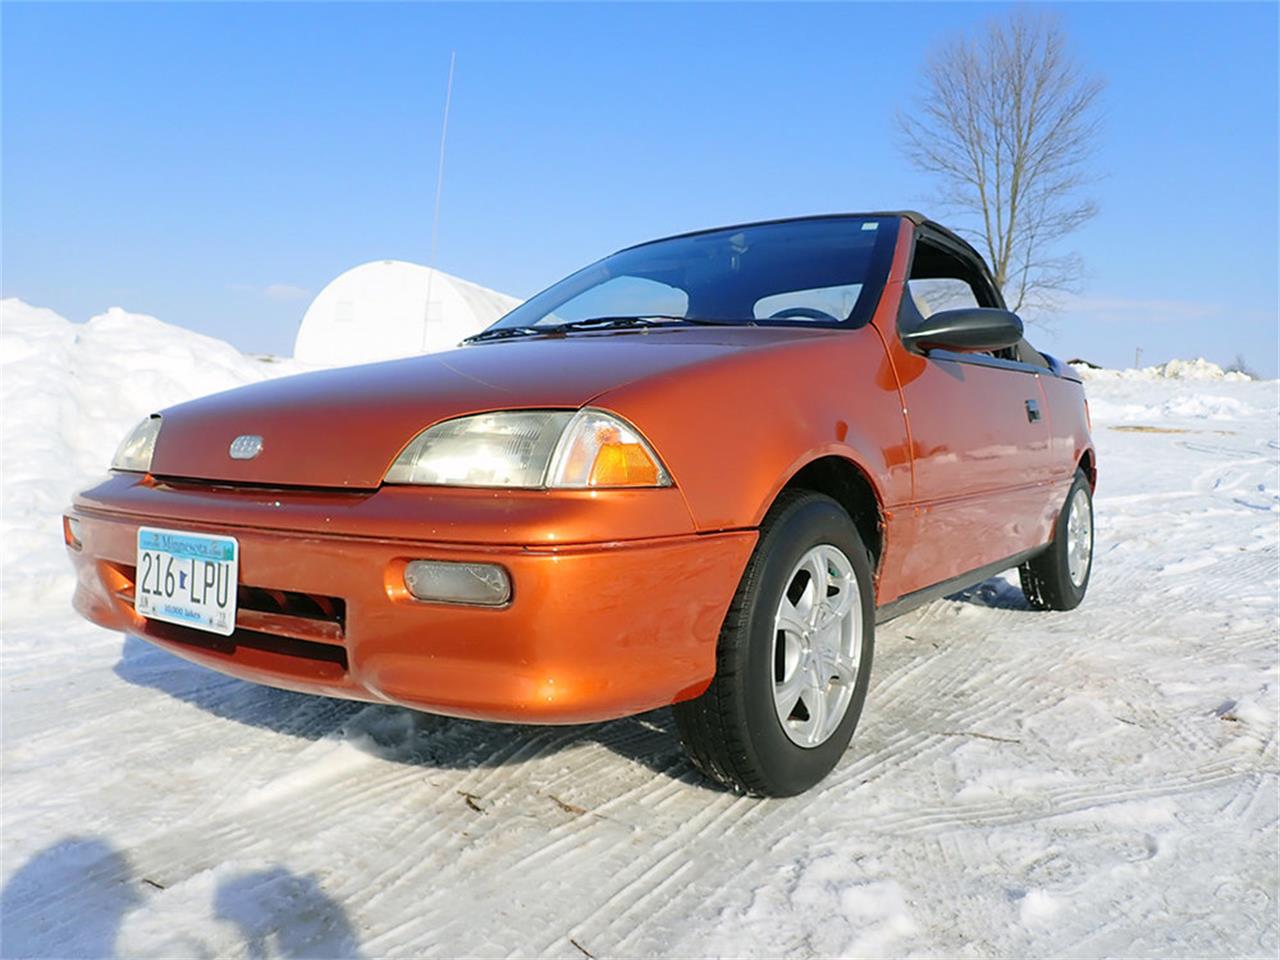 For Sale at Auction: 1992 Geo Metro for sale in Spring Grove, MN